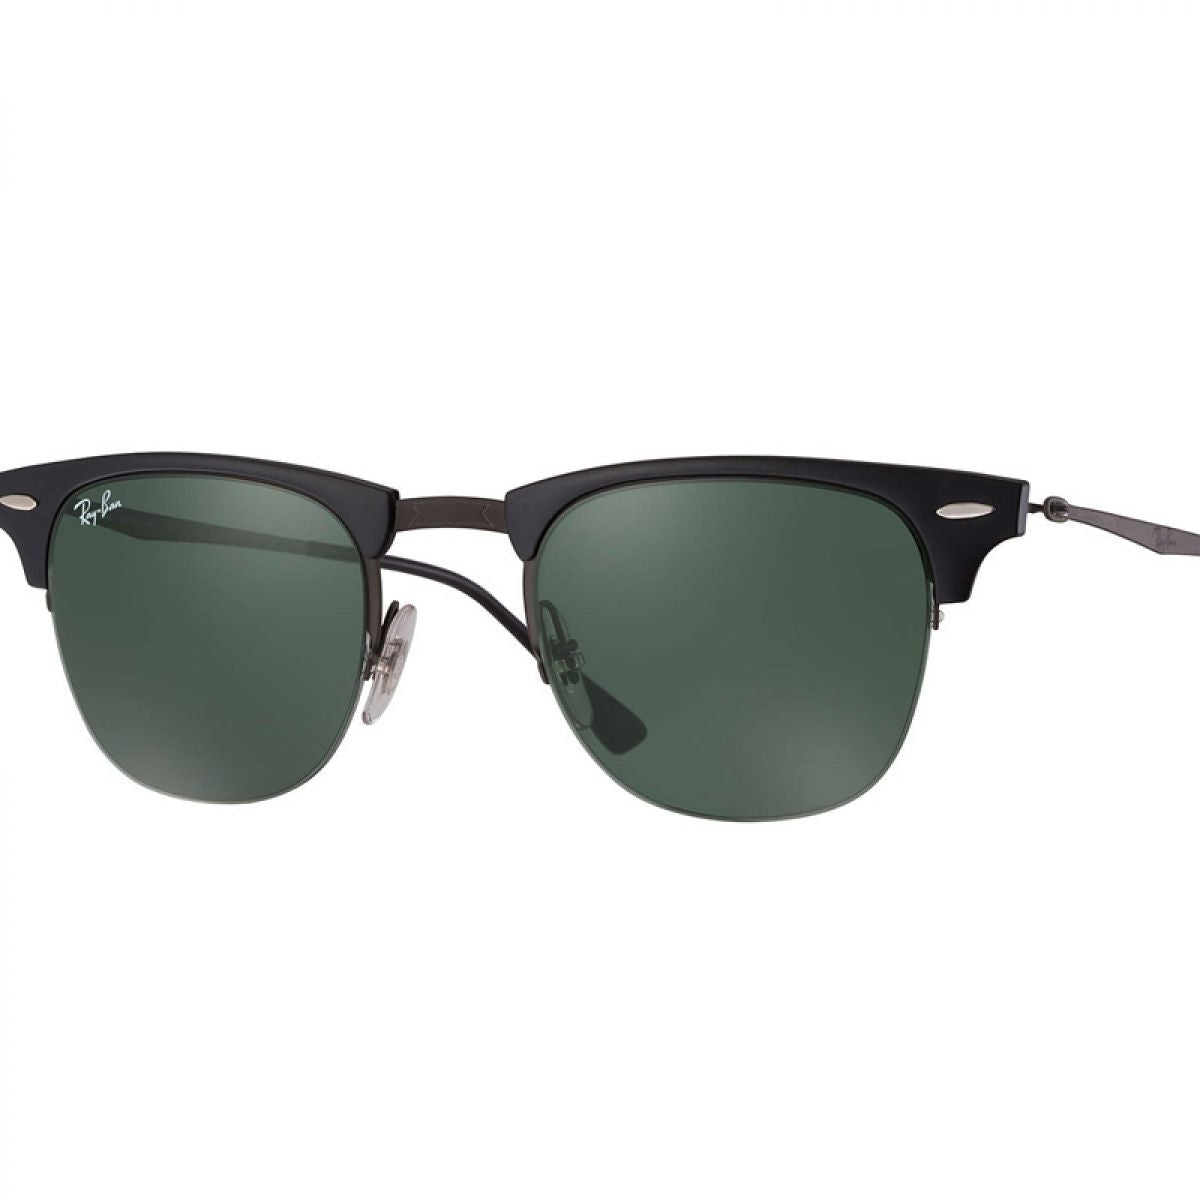 Ray-Ban Clubmaster Light Ray | RB8056 154/71 51-22